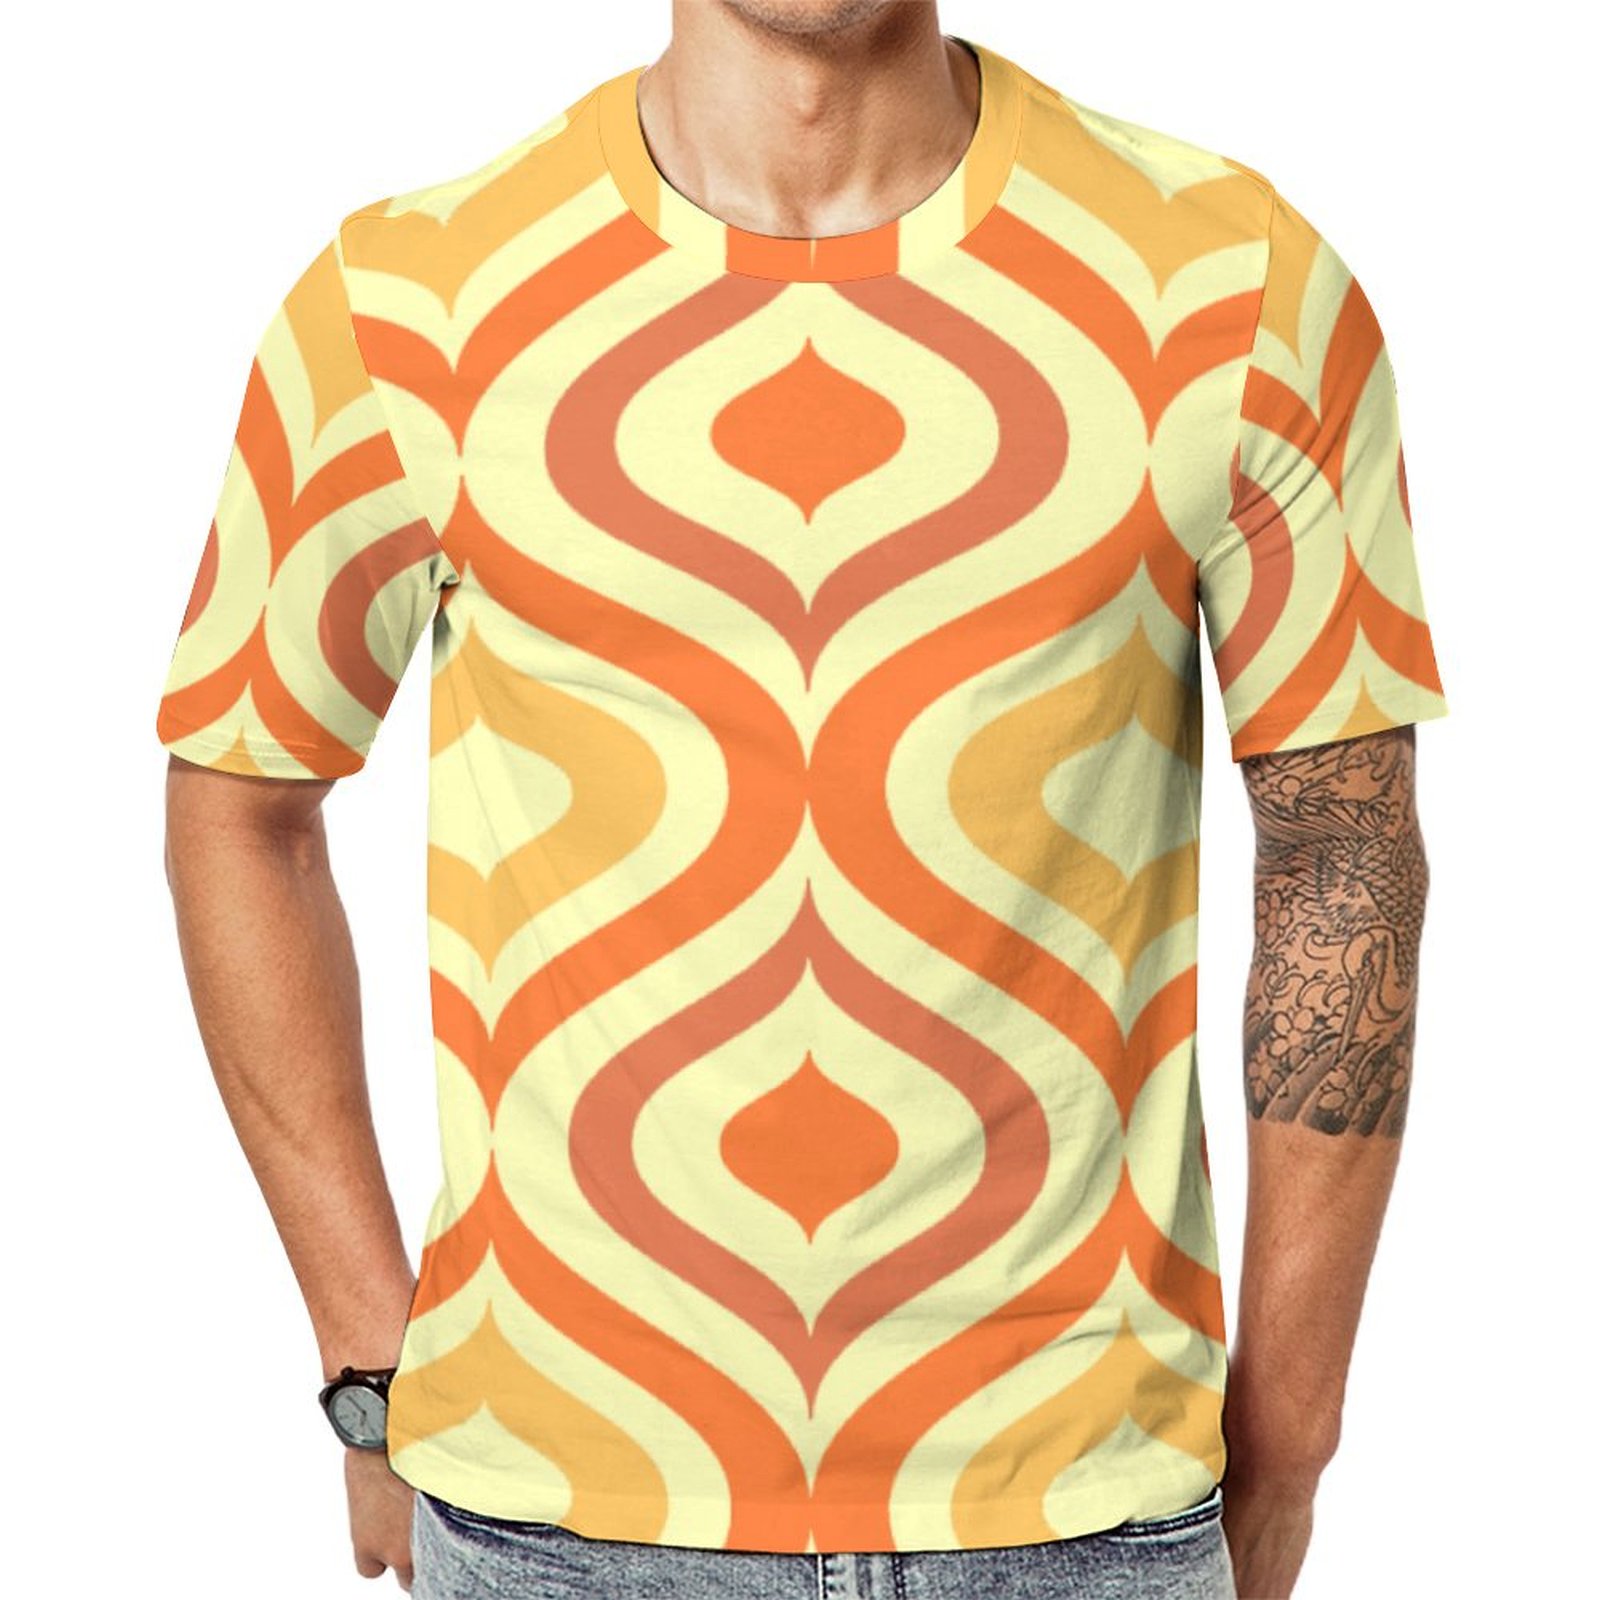 Hip Sunny Yellow Coral Orange White Ogee Waves Art Short Sleeve Print Unisex Tshirt Summer Casual Tees for Men and Women Coolcoshirts